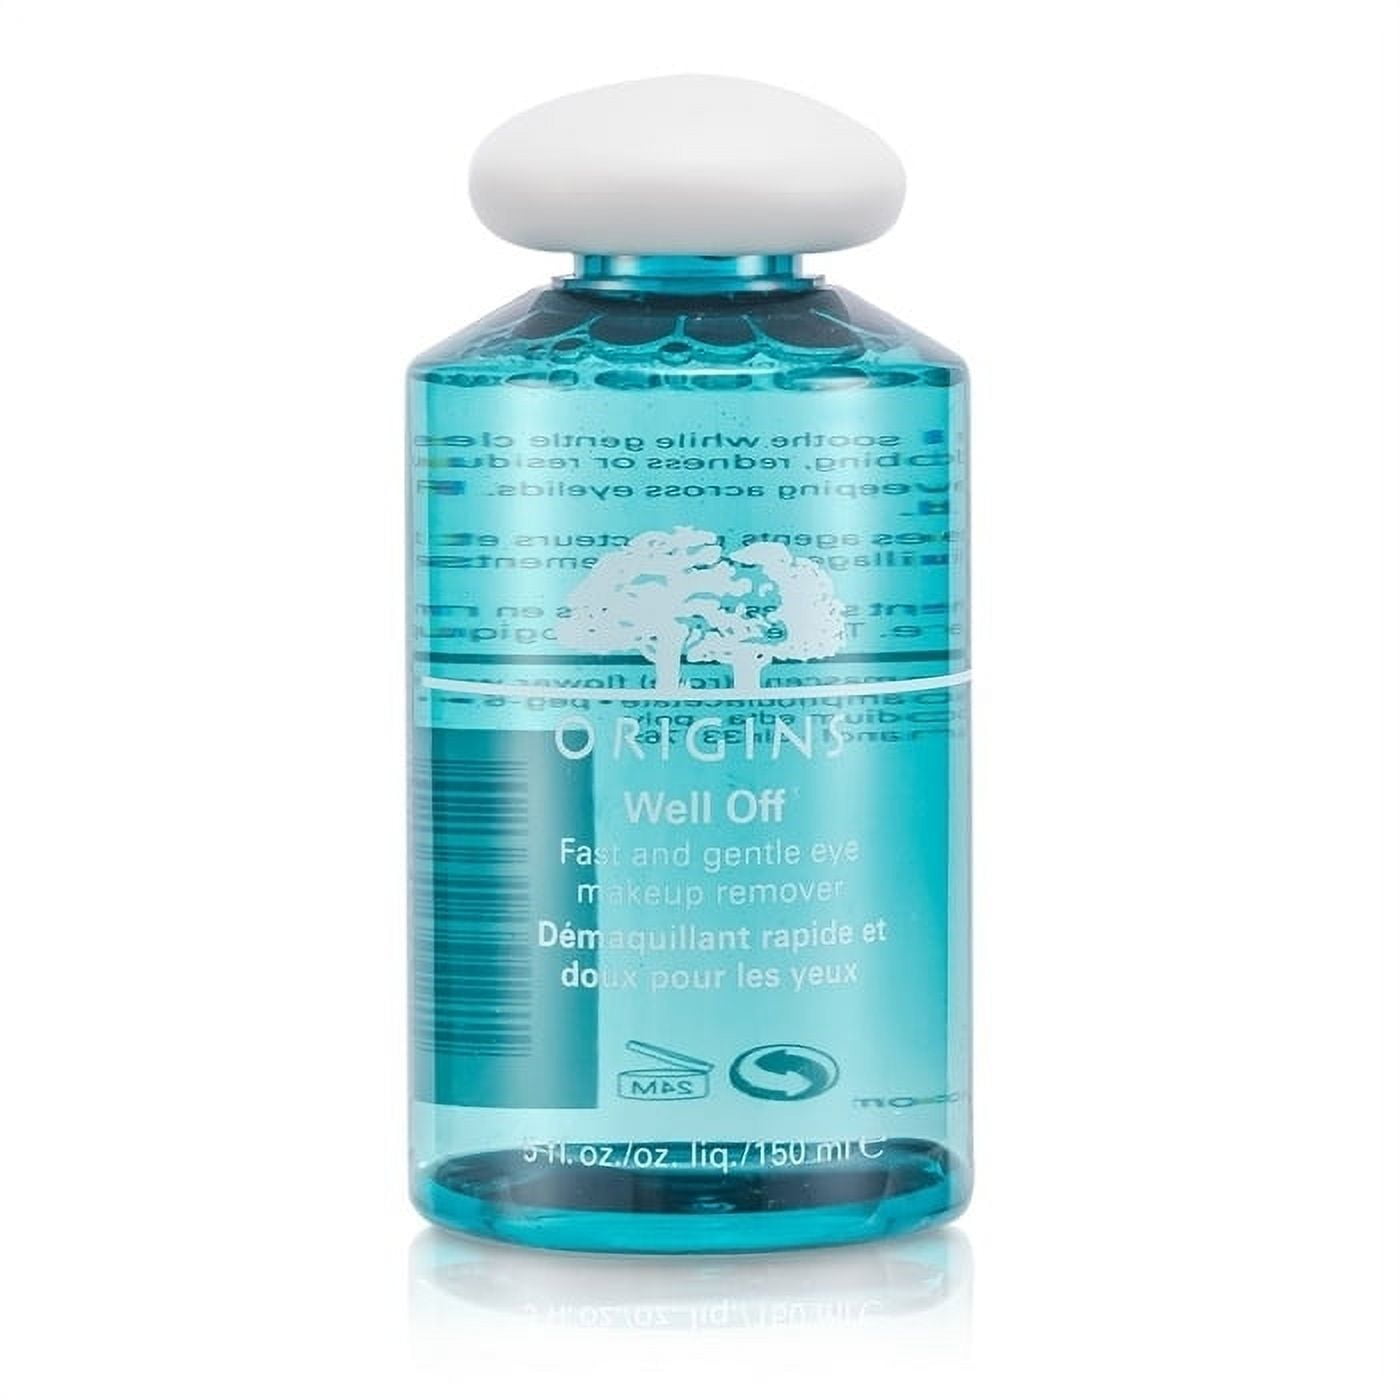 Origins Well Off Fast and Gentle Eye Makeup Remover - 5 oz